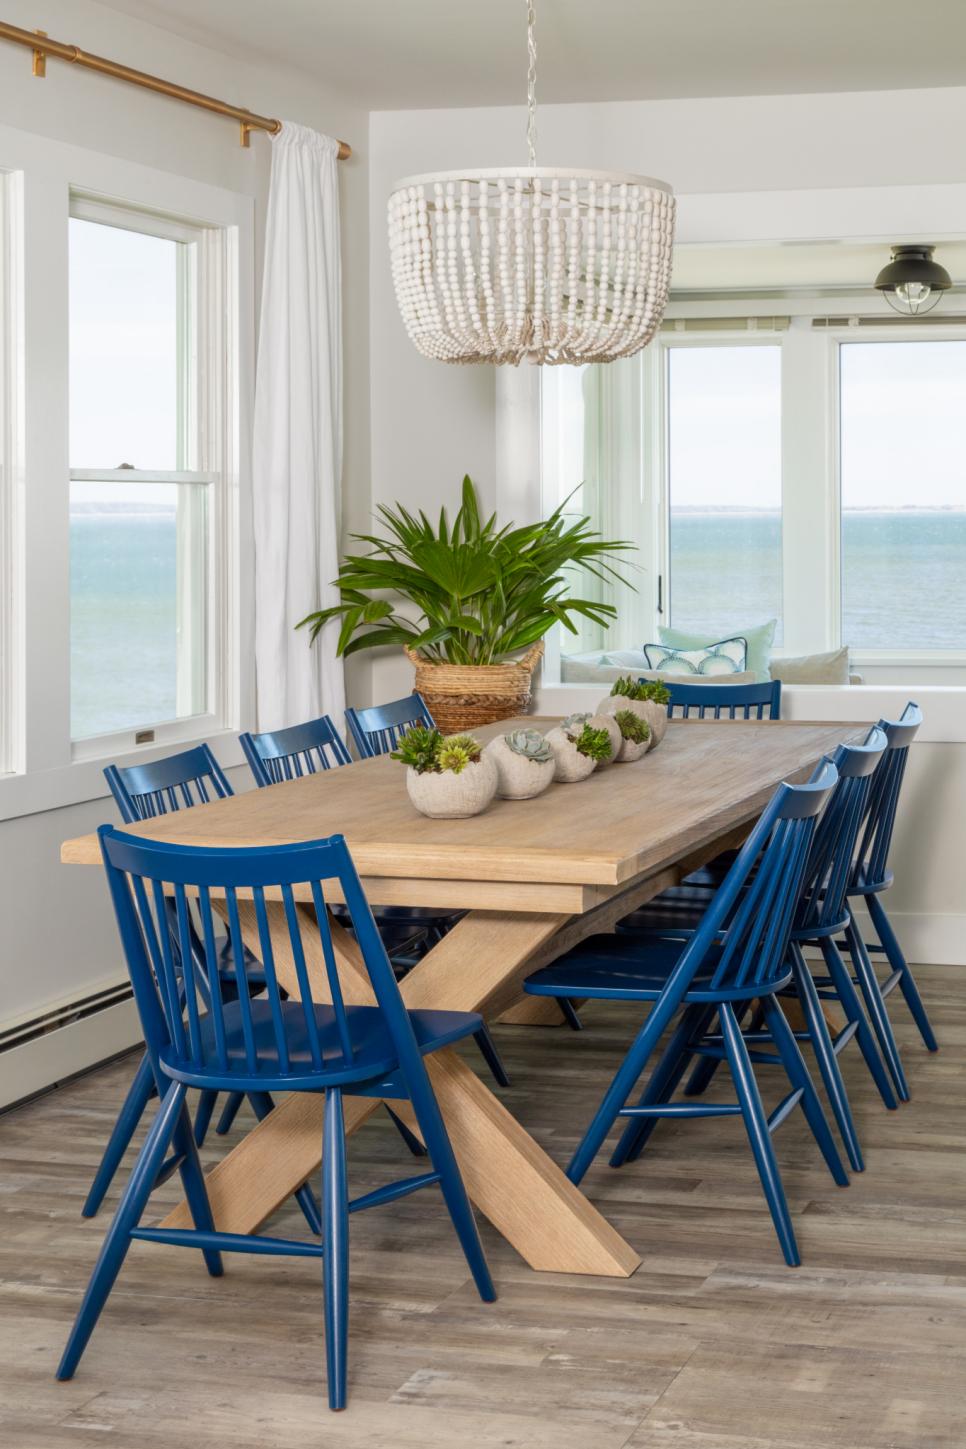 Coastal Dining Room With Blue Chairs | HGTV